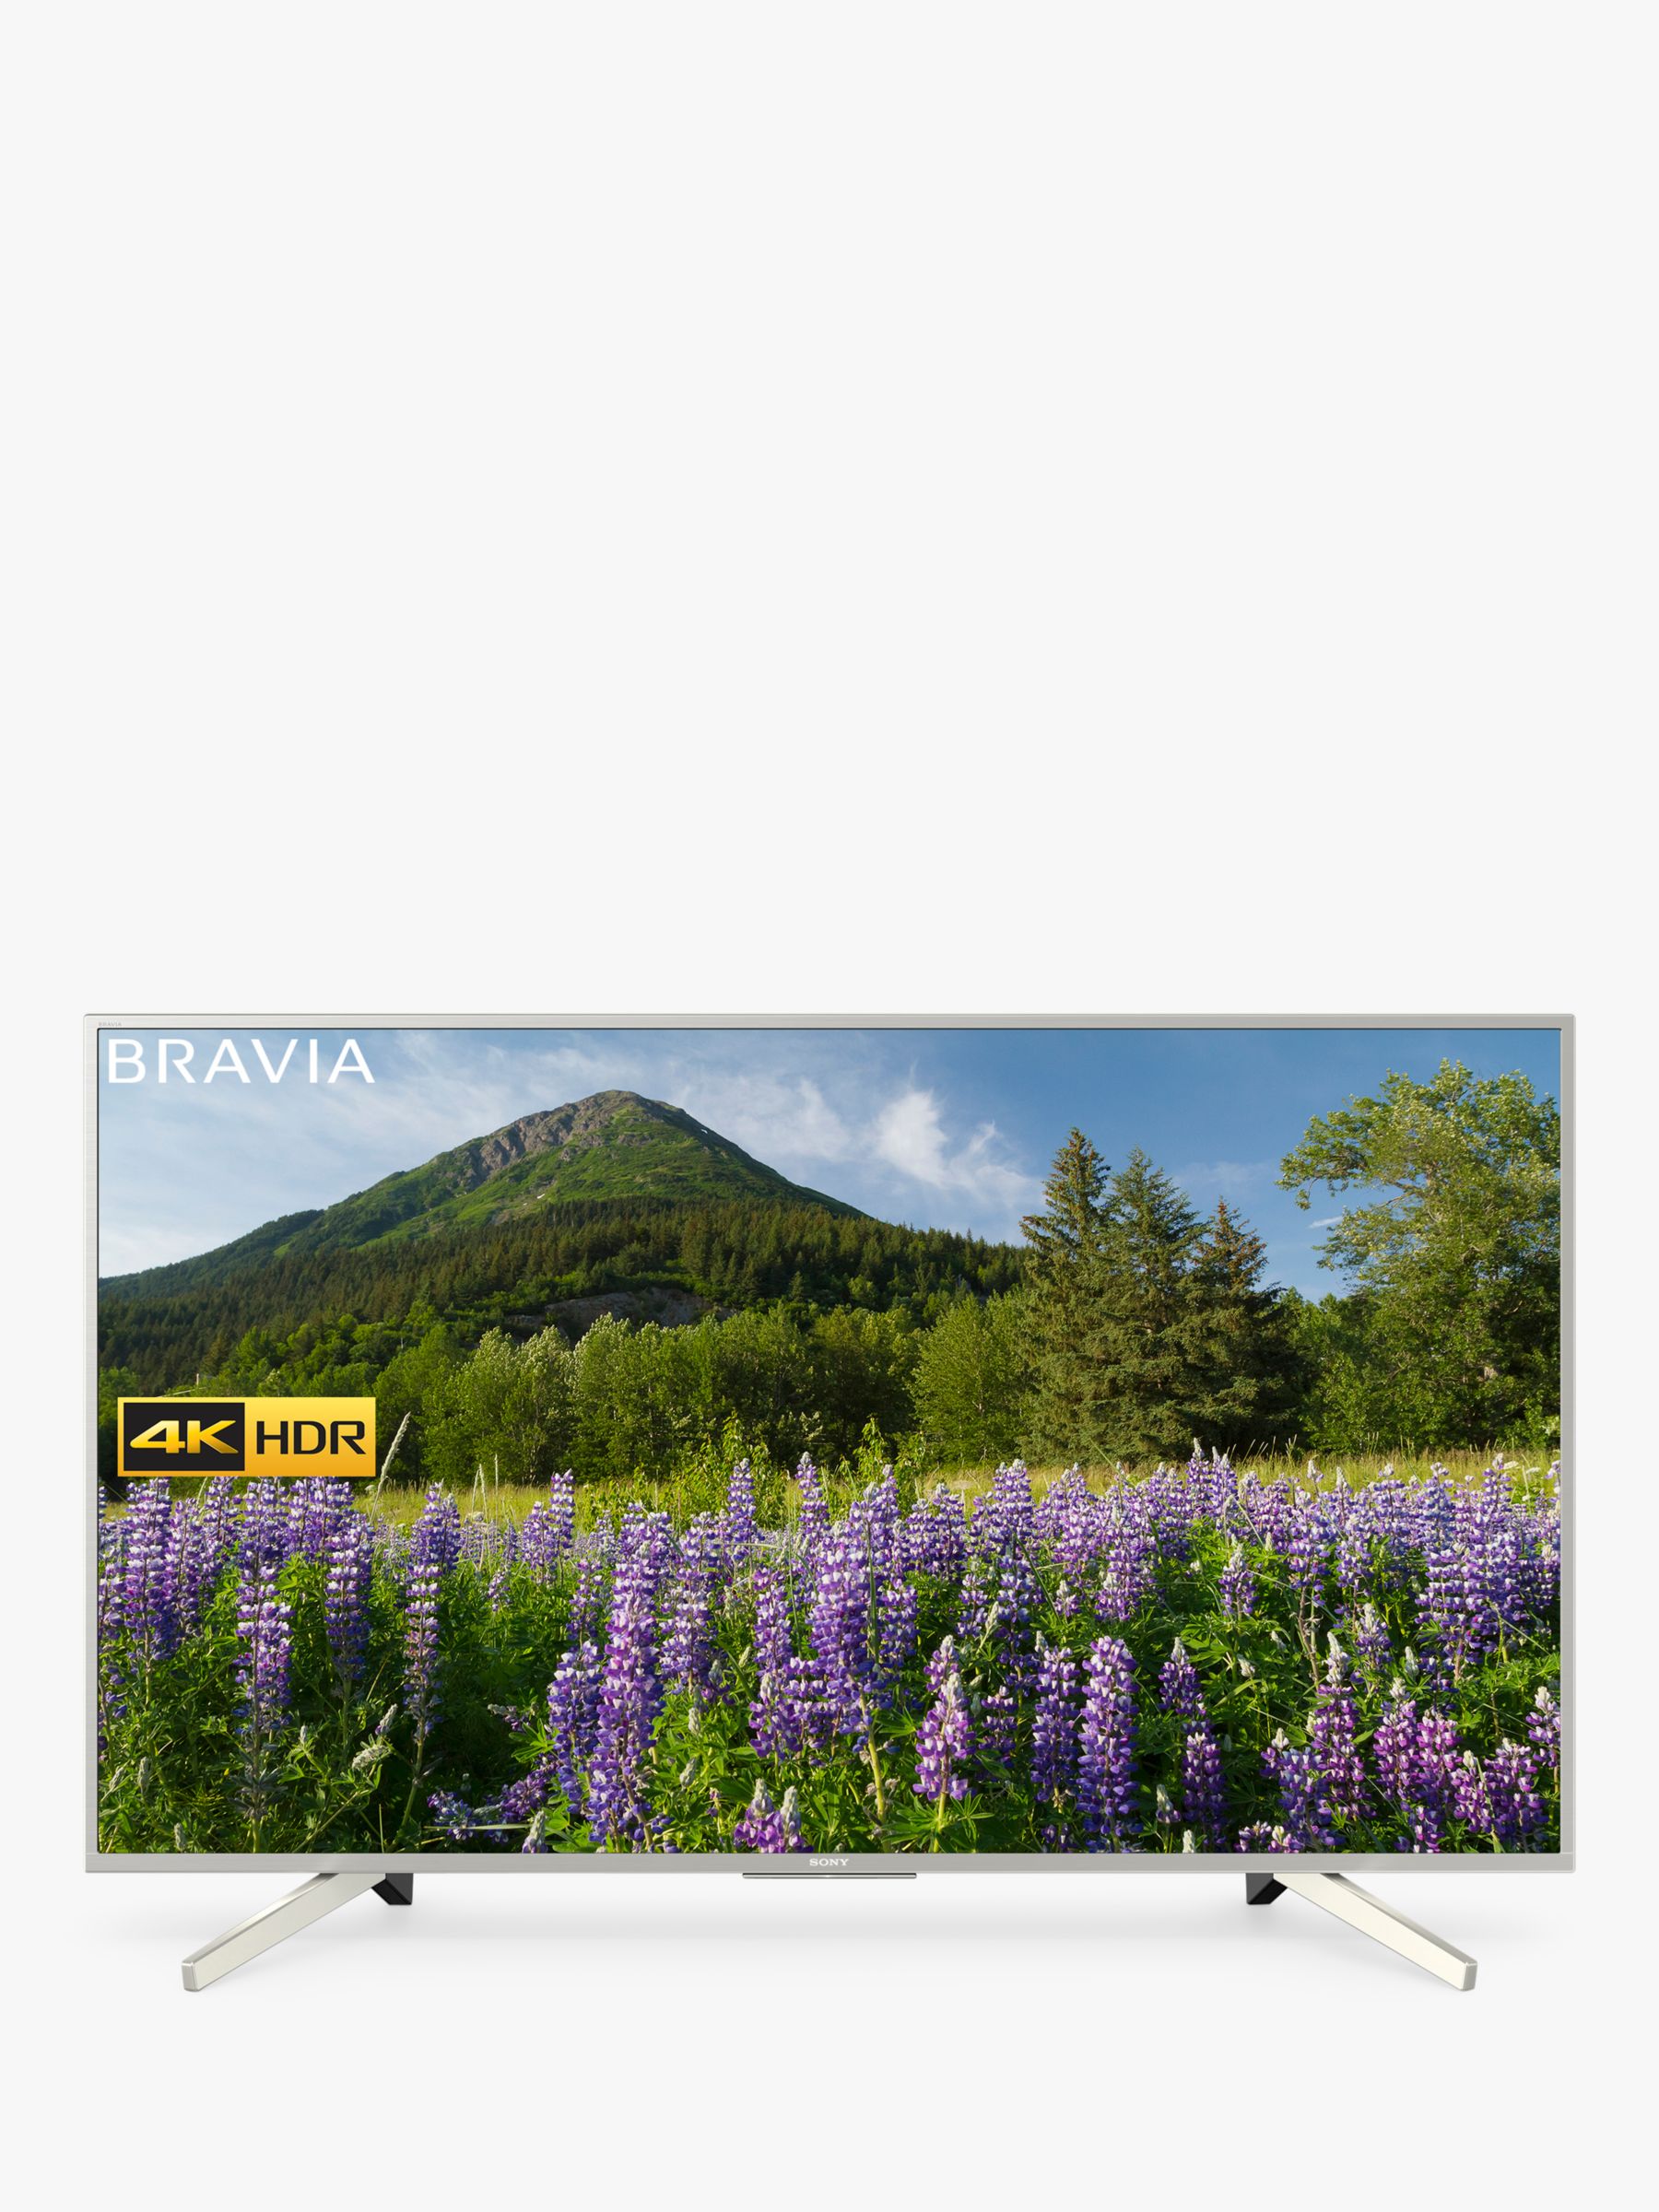 Sony Bravia KD55XF7073 LED HDR 4K Ultra HD Smart TV, 55 with Freeview Play & Cable Management, Silver